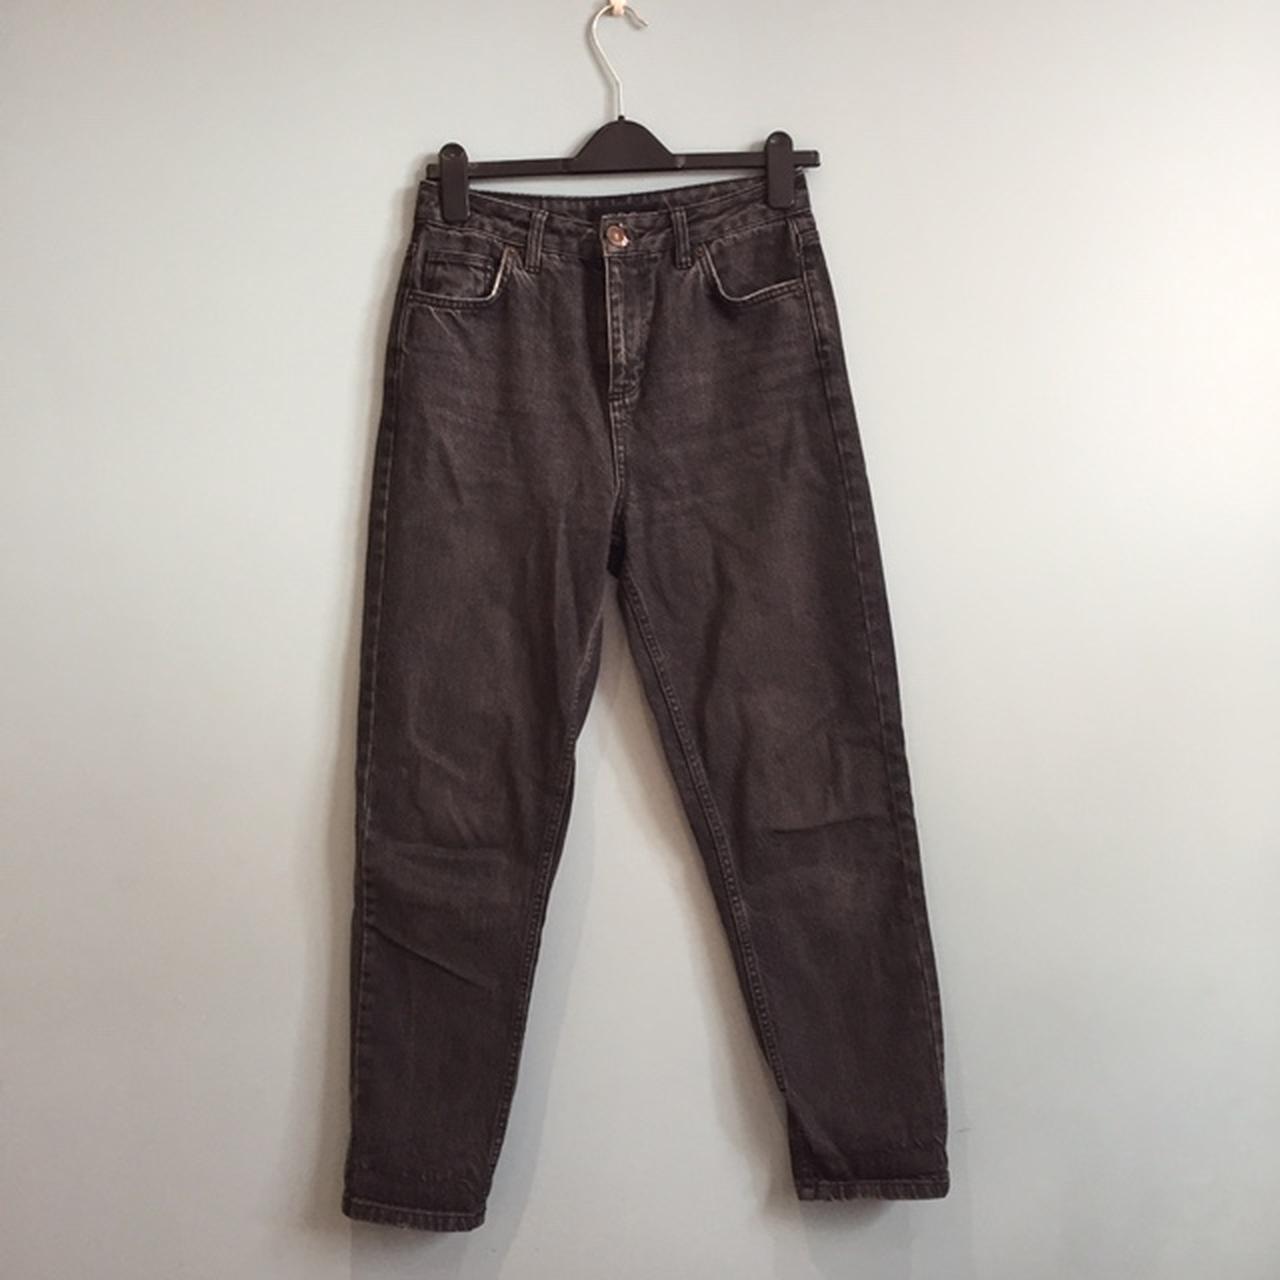 Black washed mom jeans. Worn a fair amount but in... - Depop